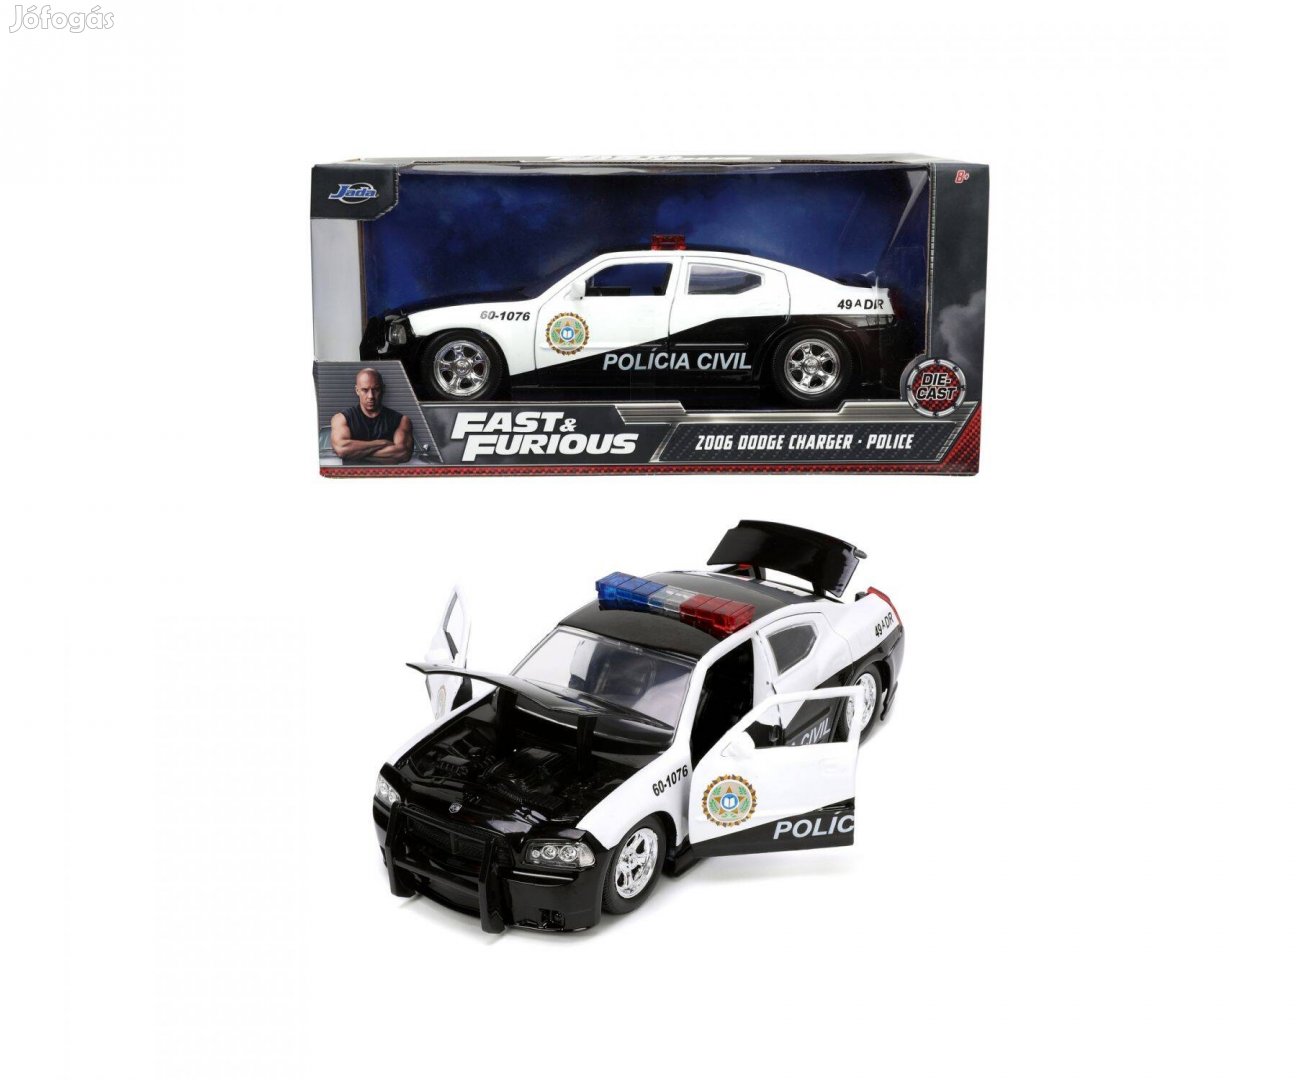 Fast & Furious 2006 Dodge Charger Police 1:24 Autó Modell